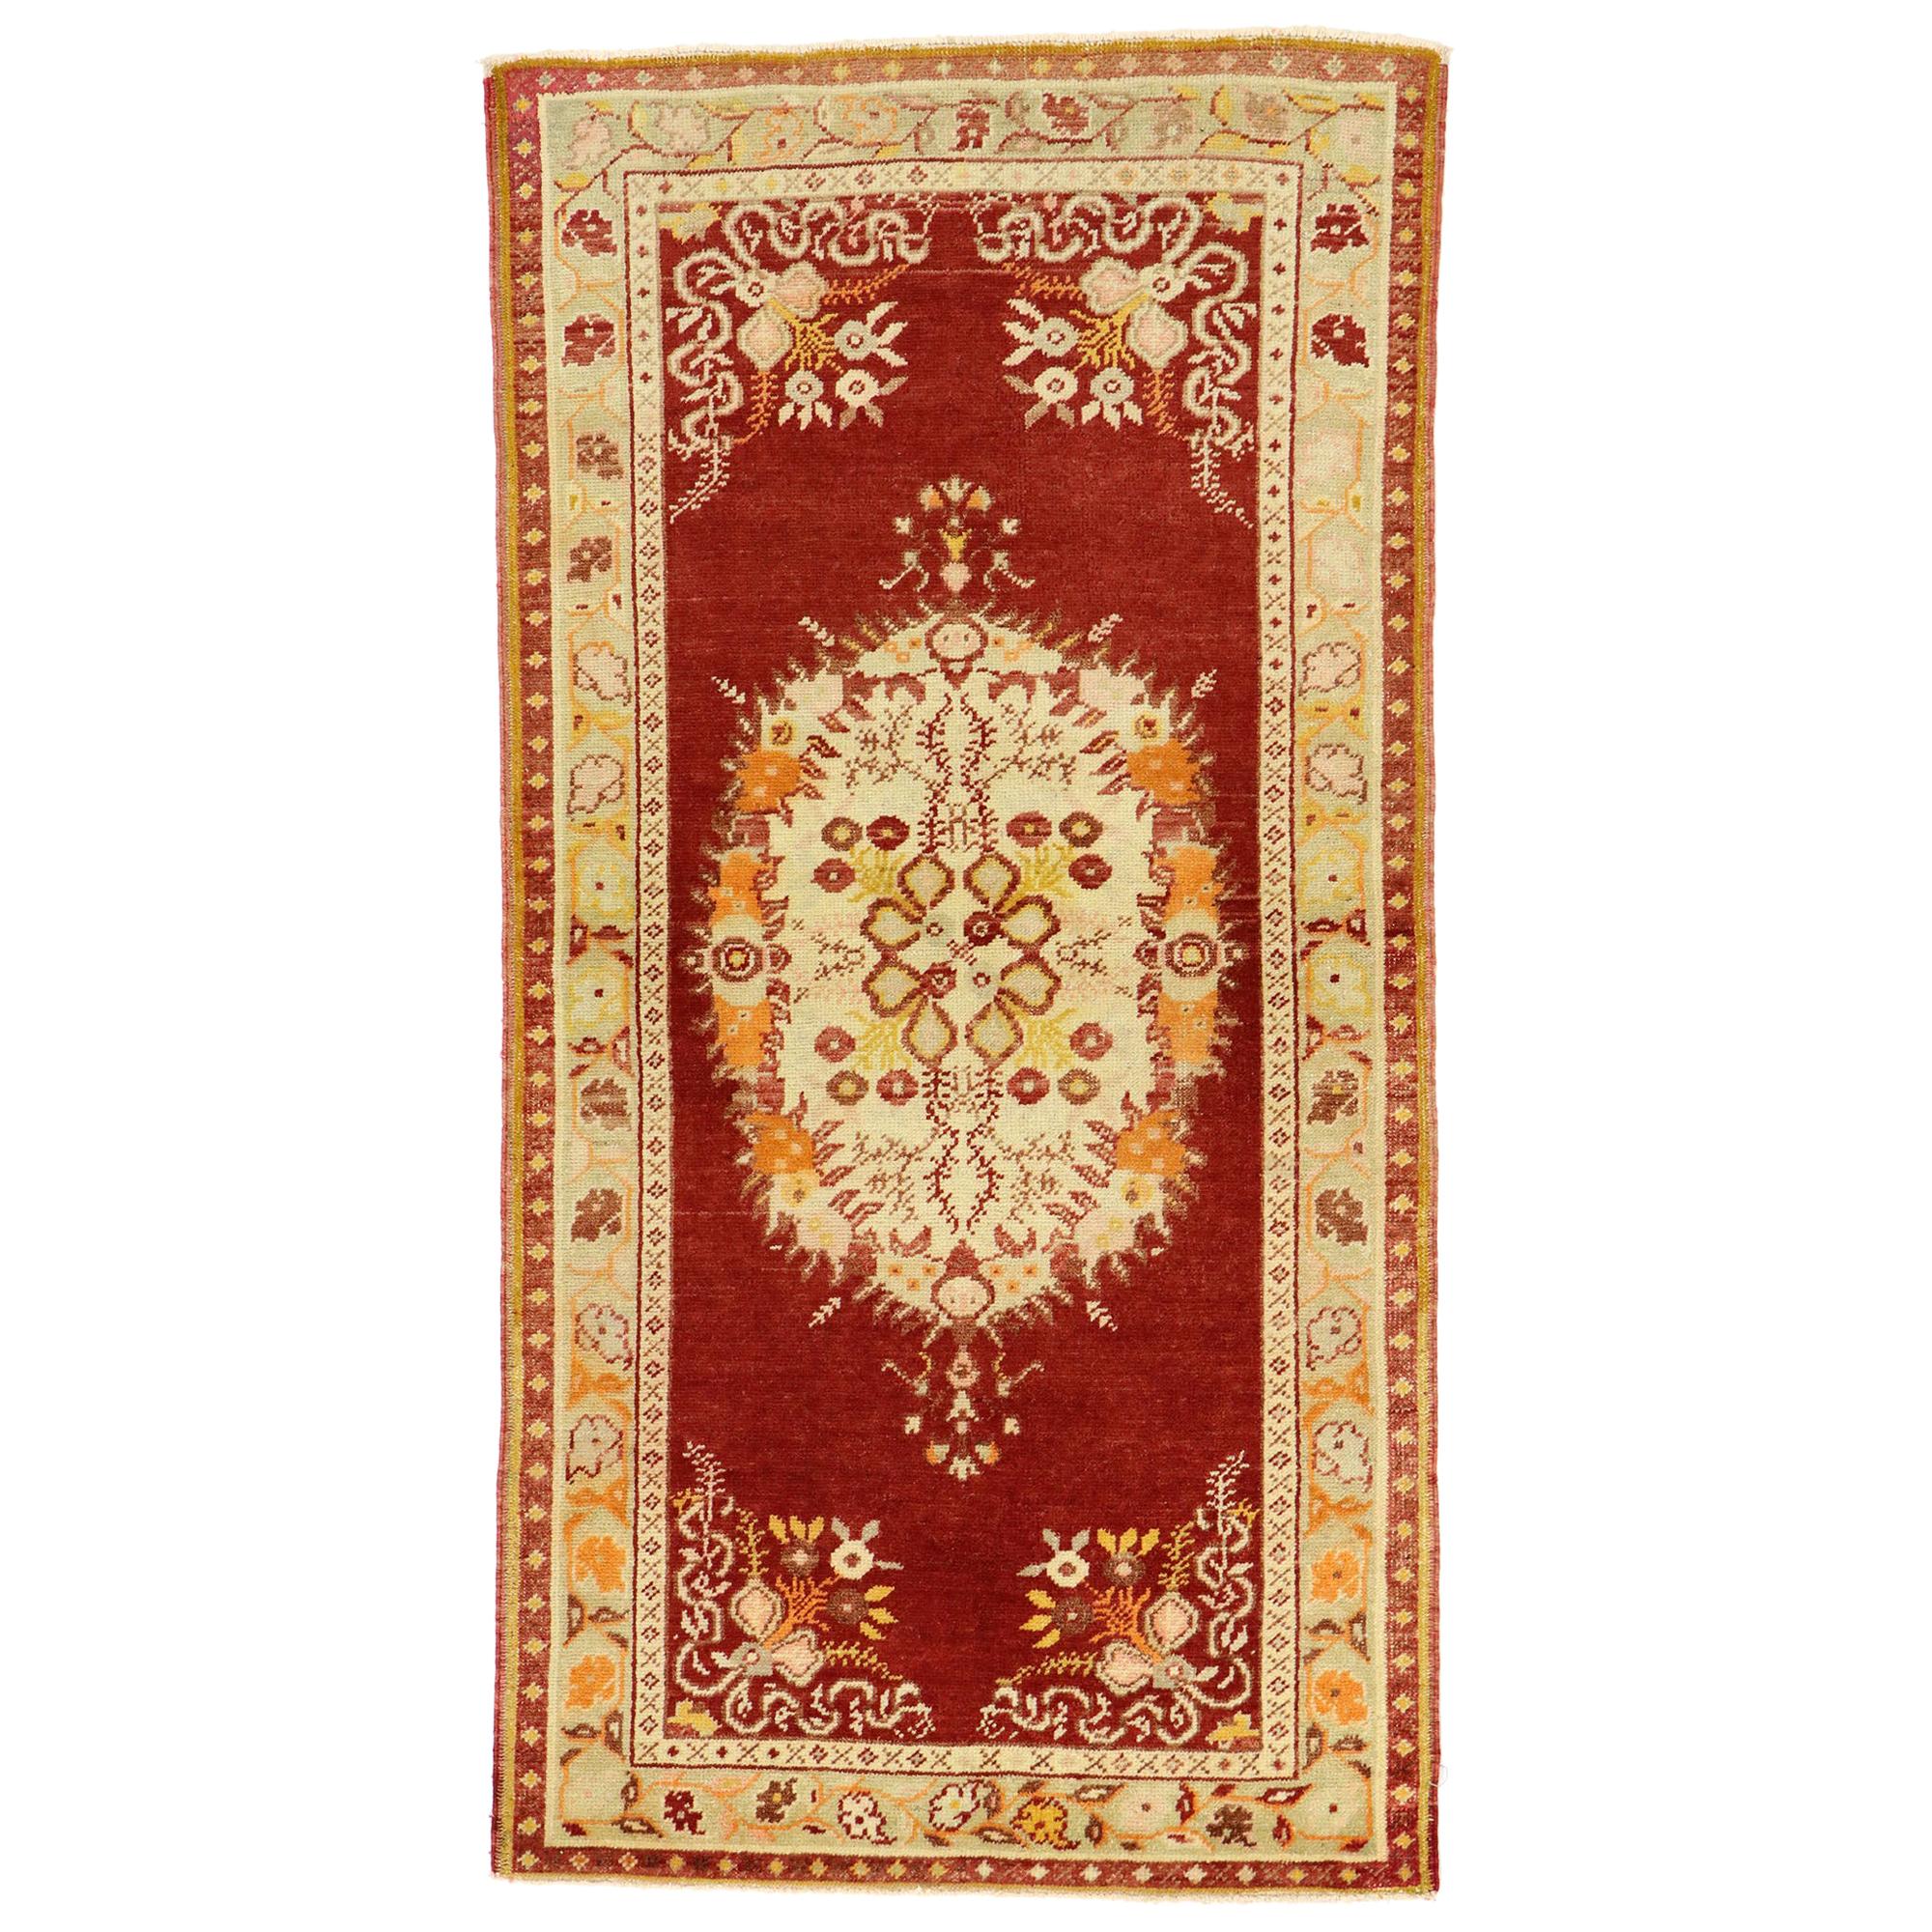 Vintage Turkish Oushak Rug with French Rococo Style, Kitchen, Foyer or Entry Rug